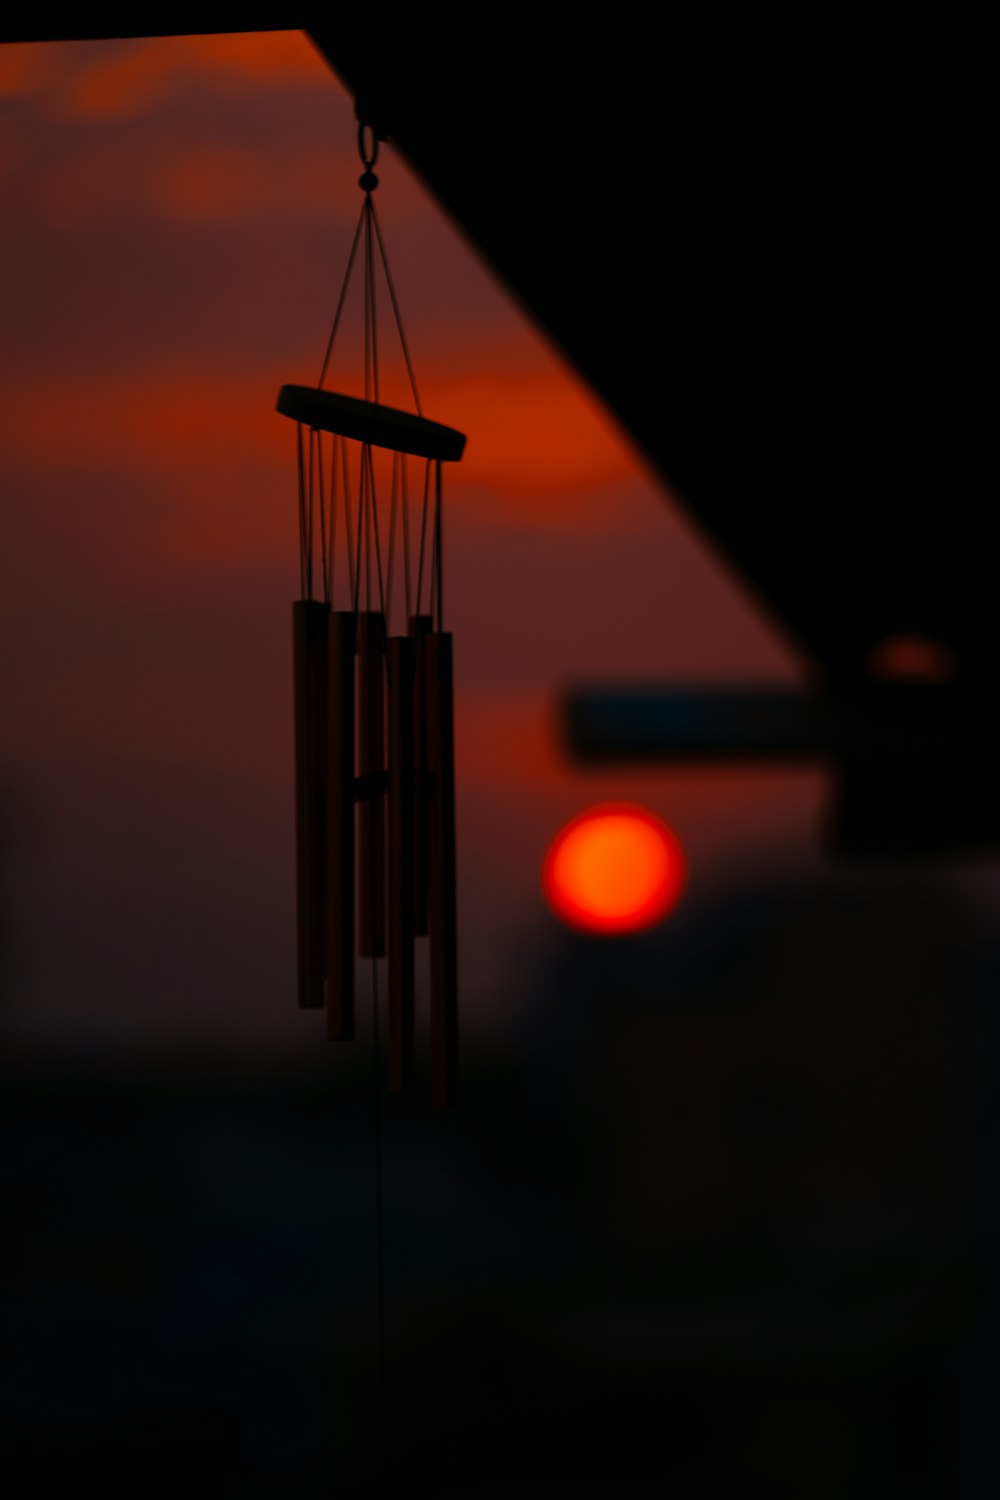 gray and orange wind chime